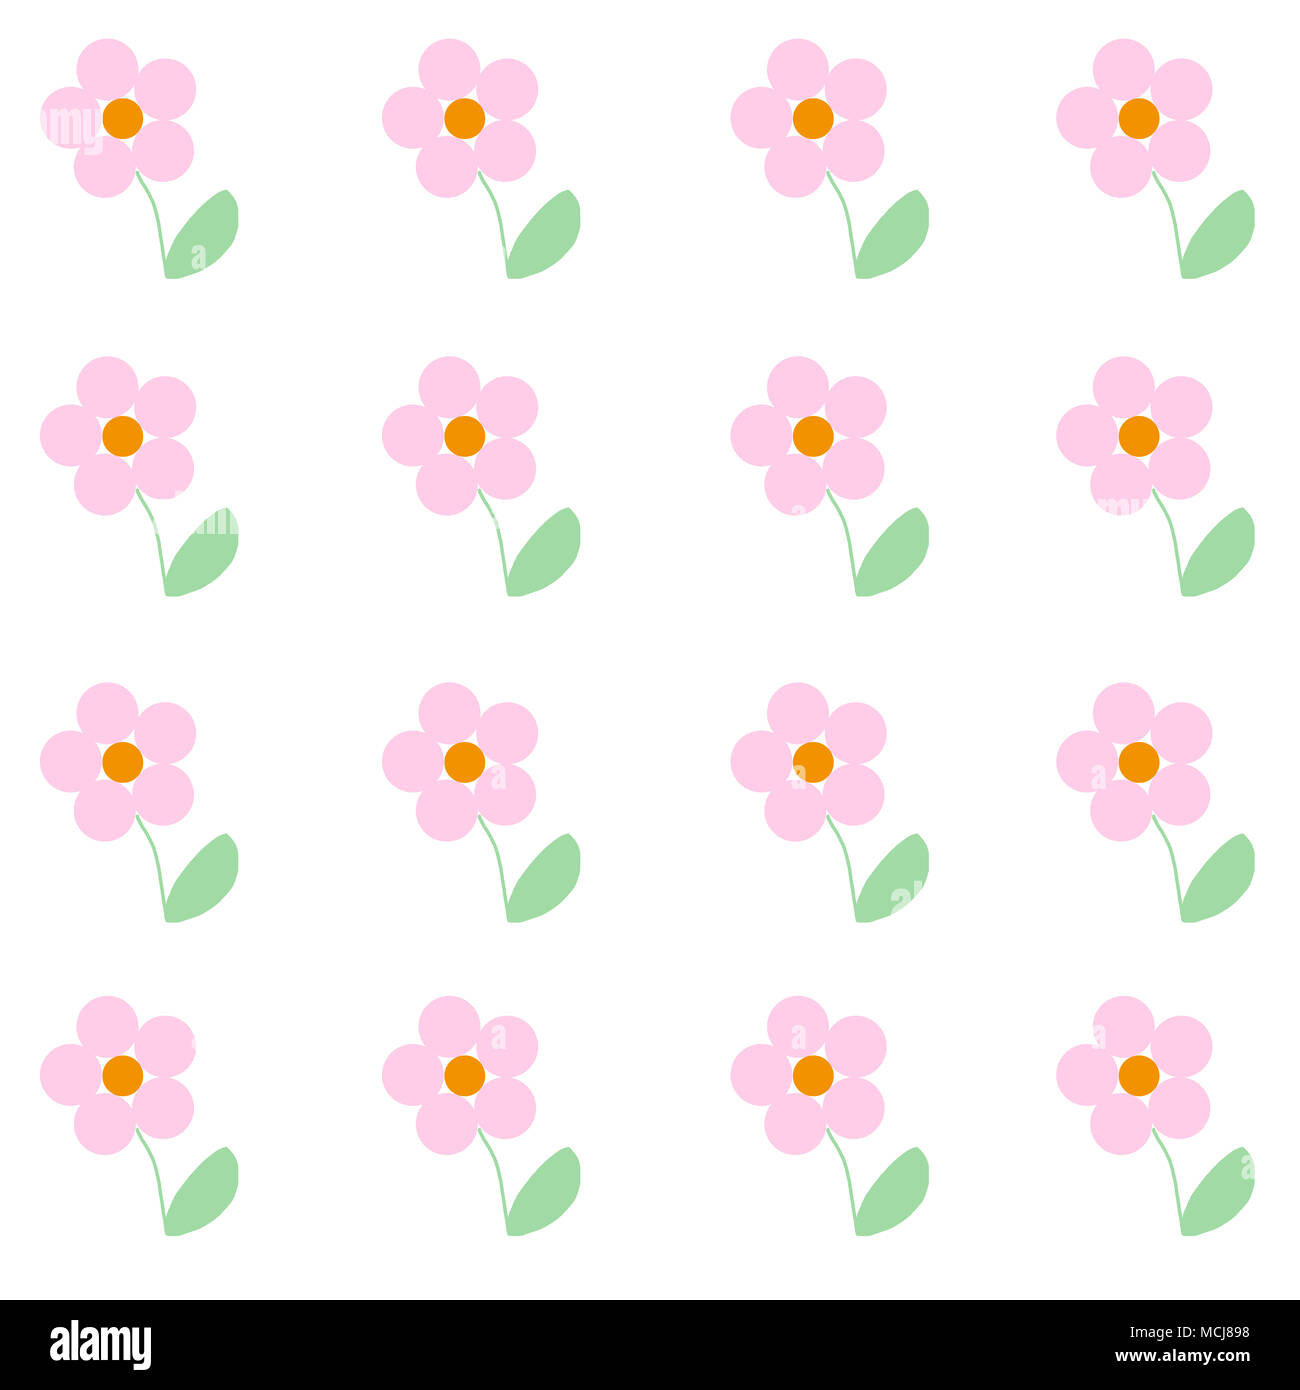 Cute Illustrated Baby Pink Flowers Simple Print To Be Used As A Canvas Background Wallpaper Childlike Drawing With Pastel Colors Stock Photo Alamy